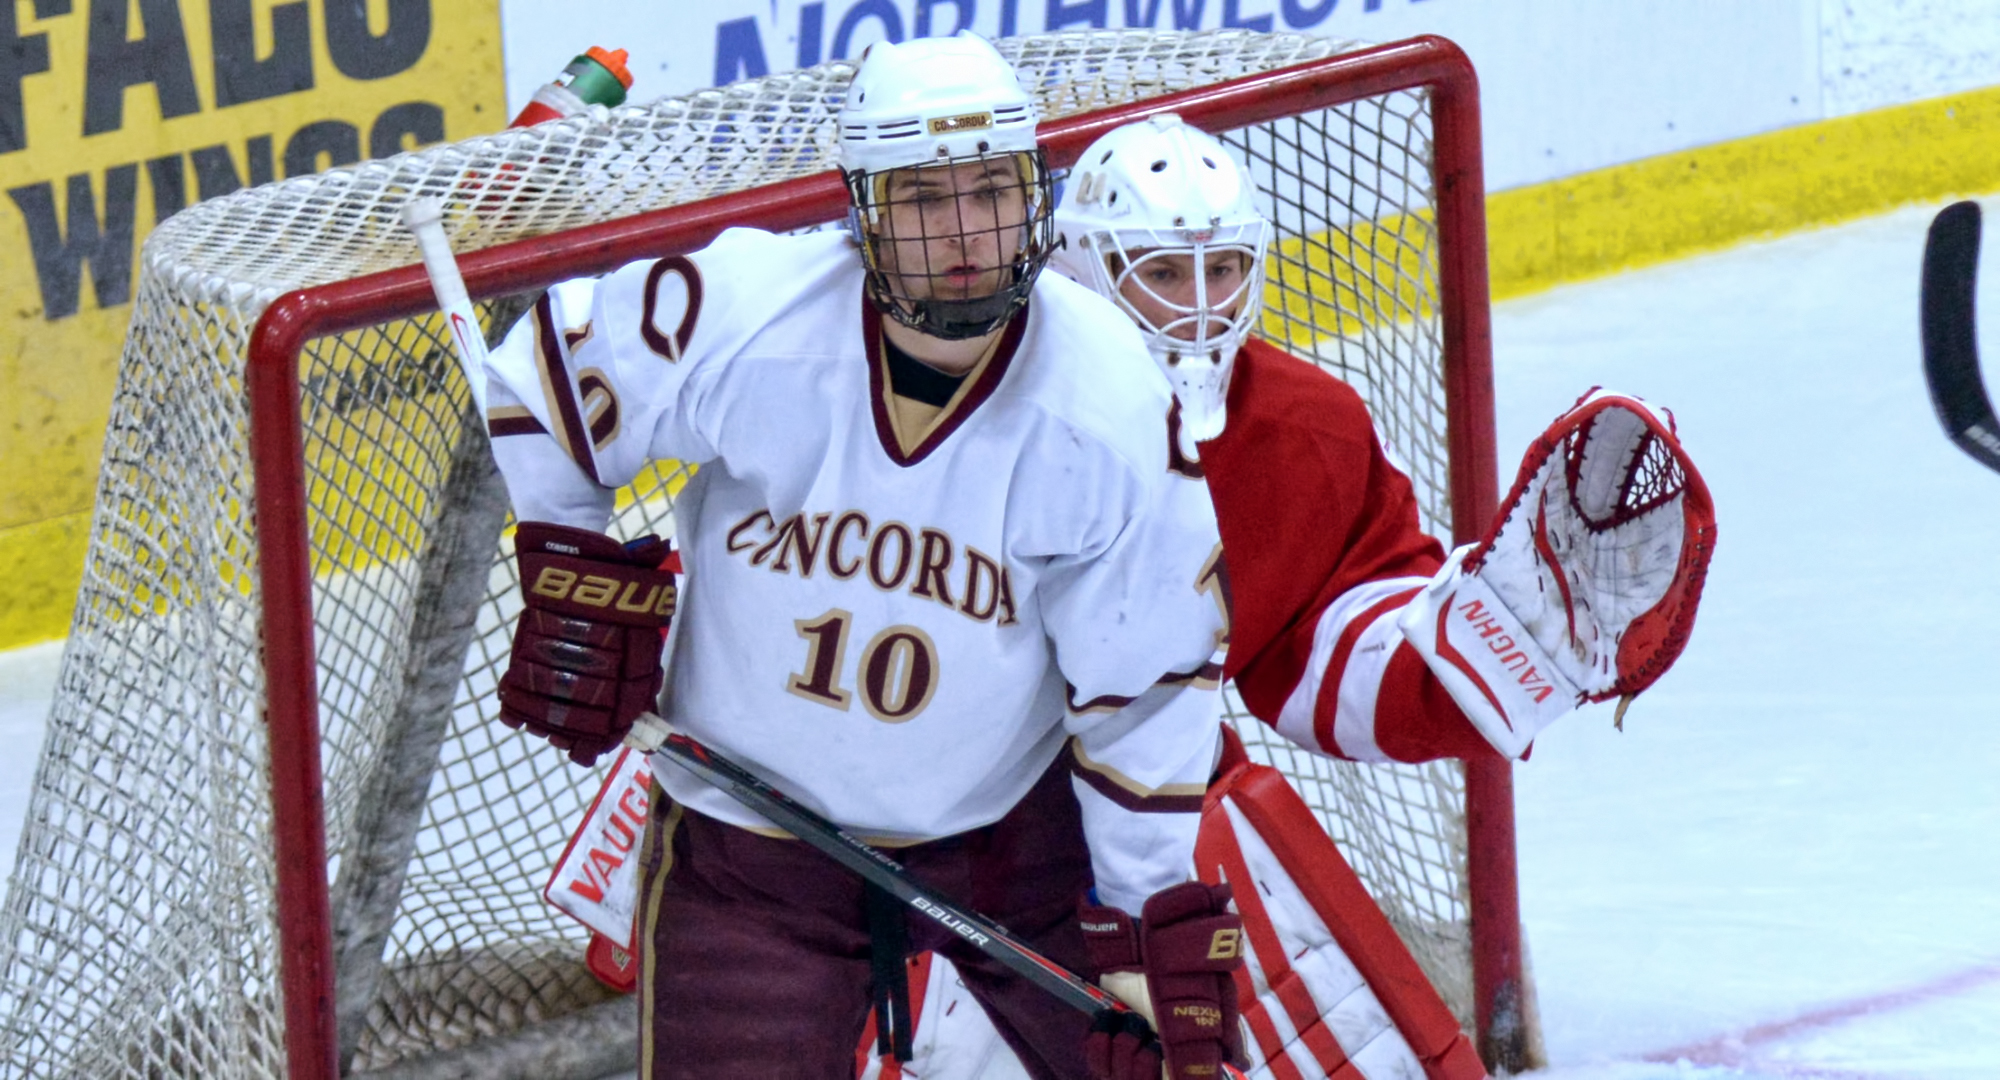 Zach Doerring scored the lone goal for the Cobbers in their series opener at St. John's.